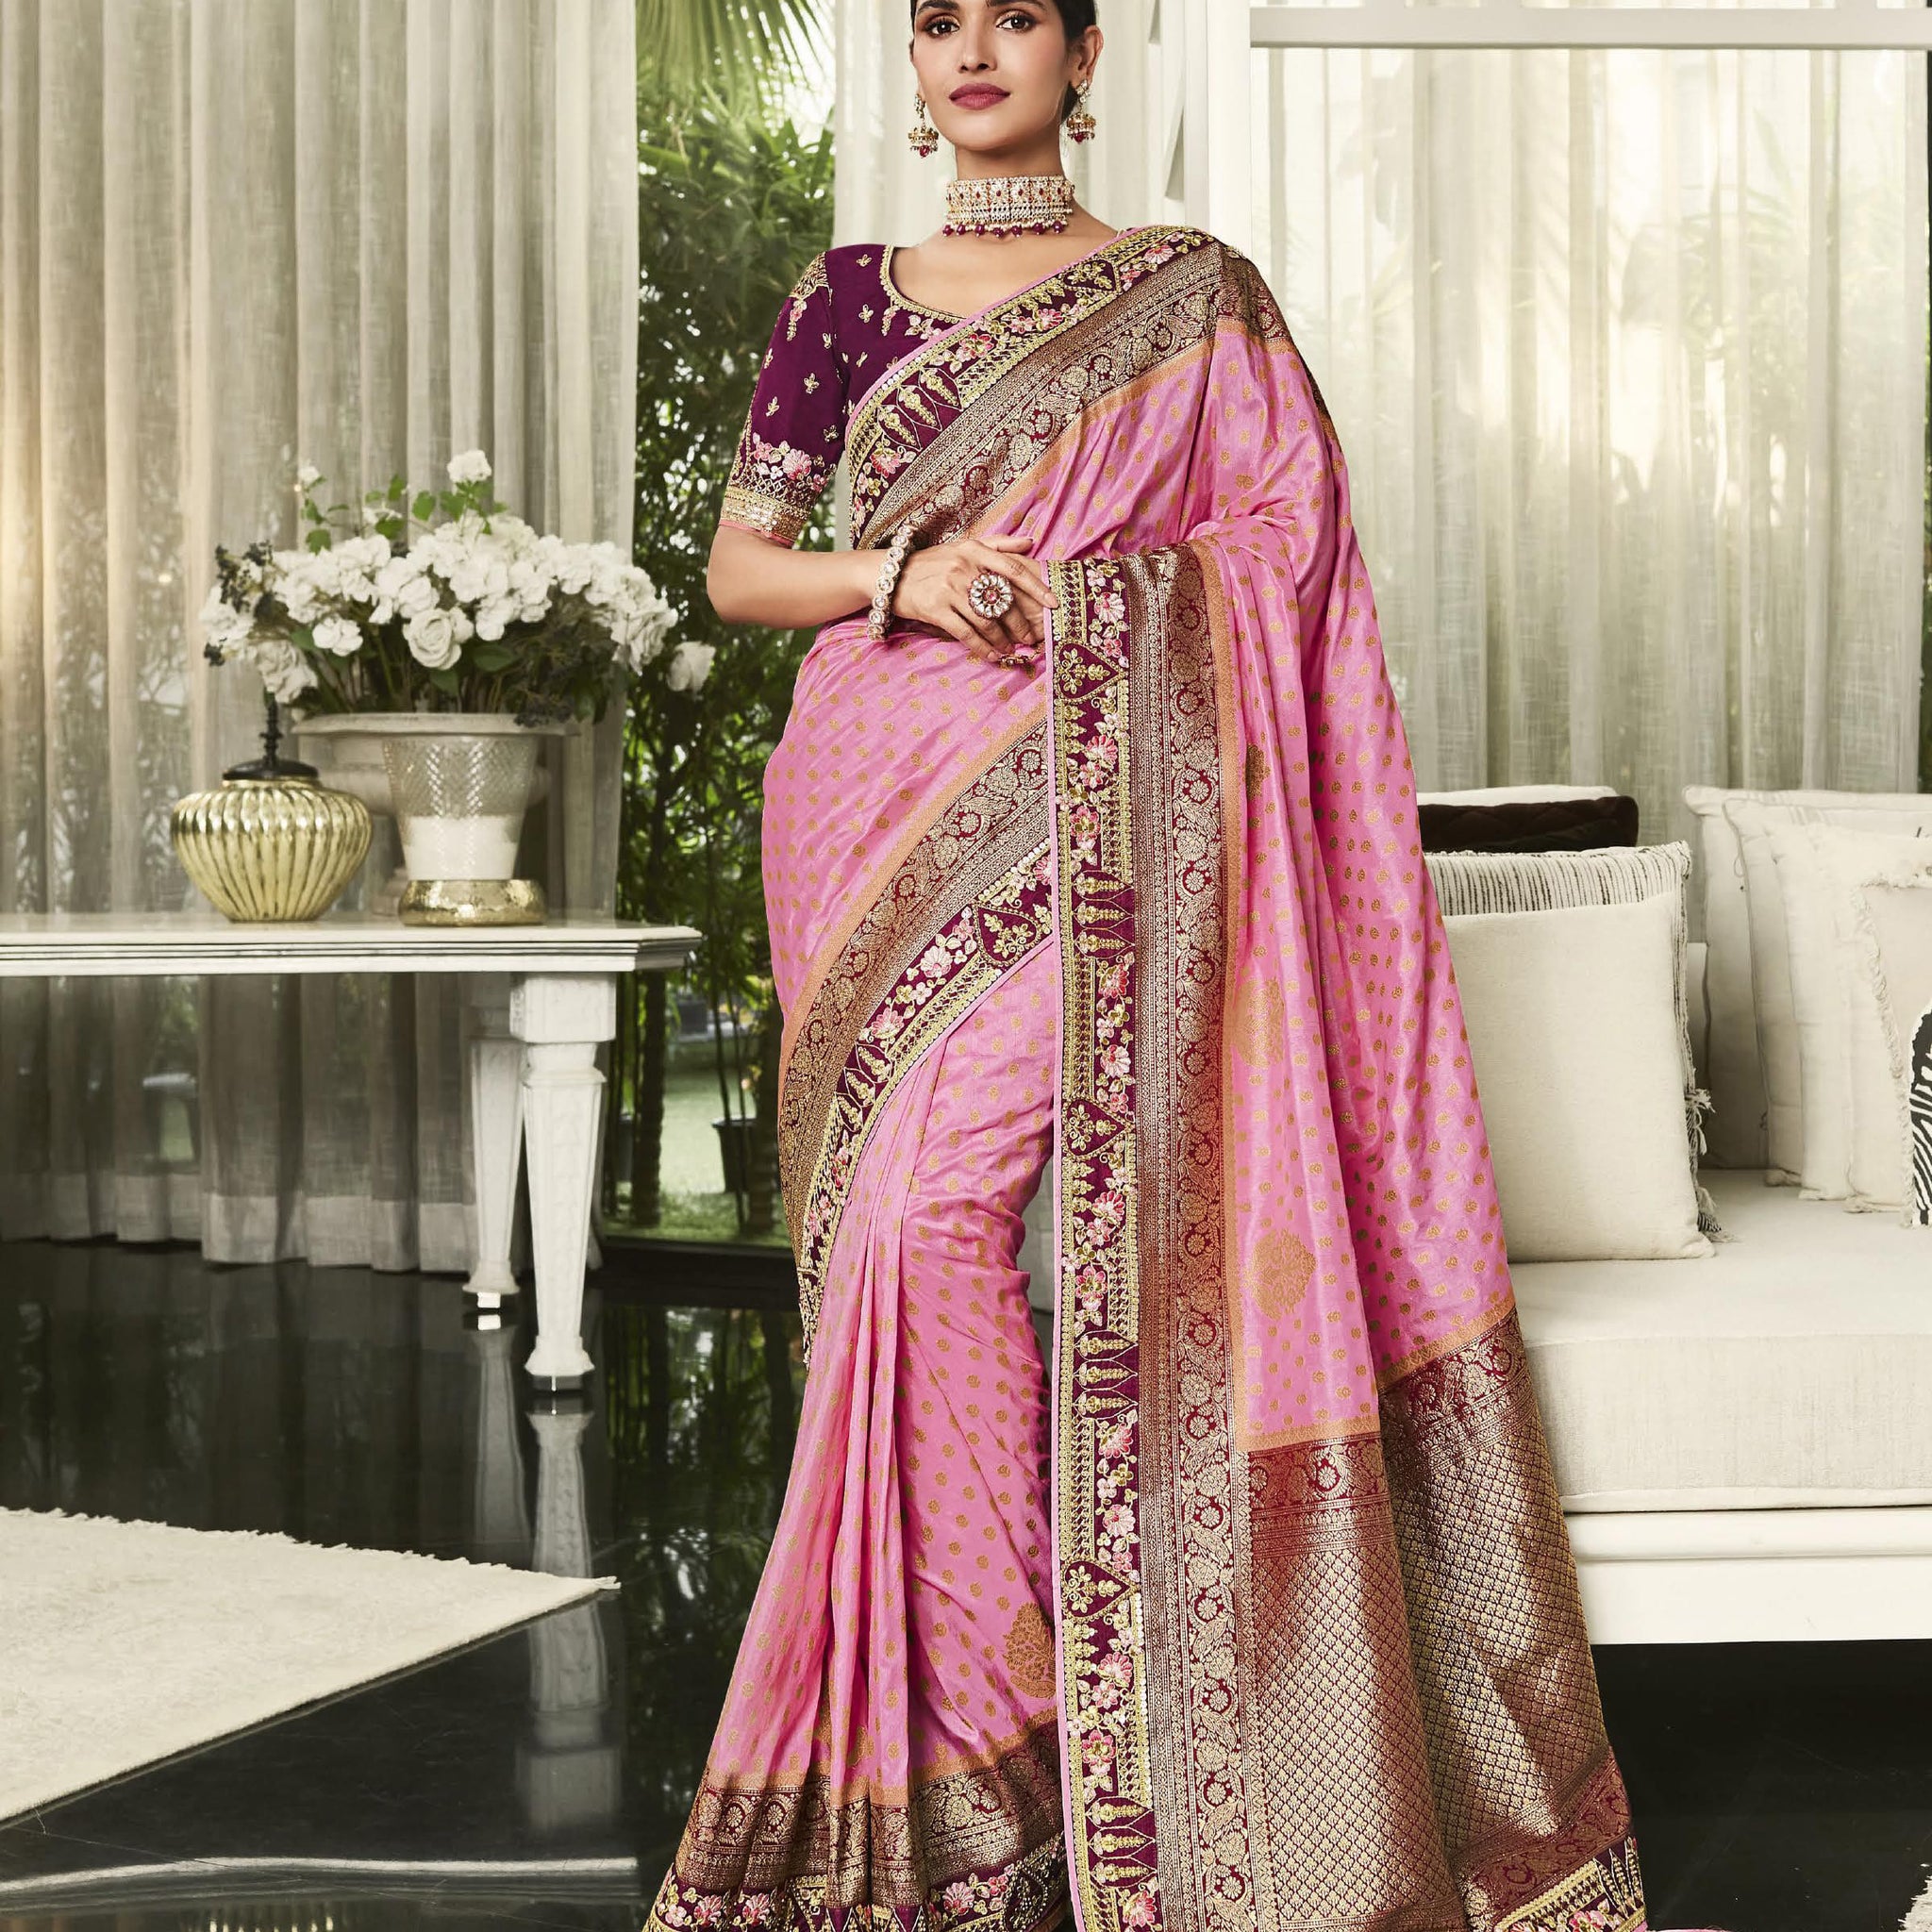 Stunning Pink Color Embroidered Border Work Party Style Dola Saree